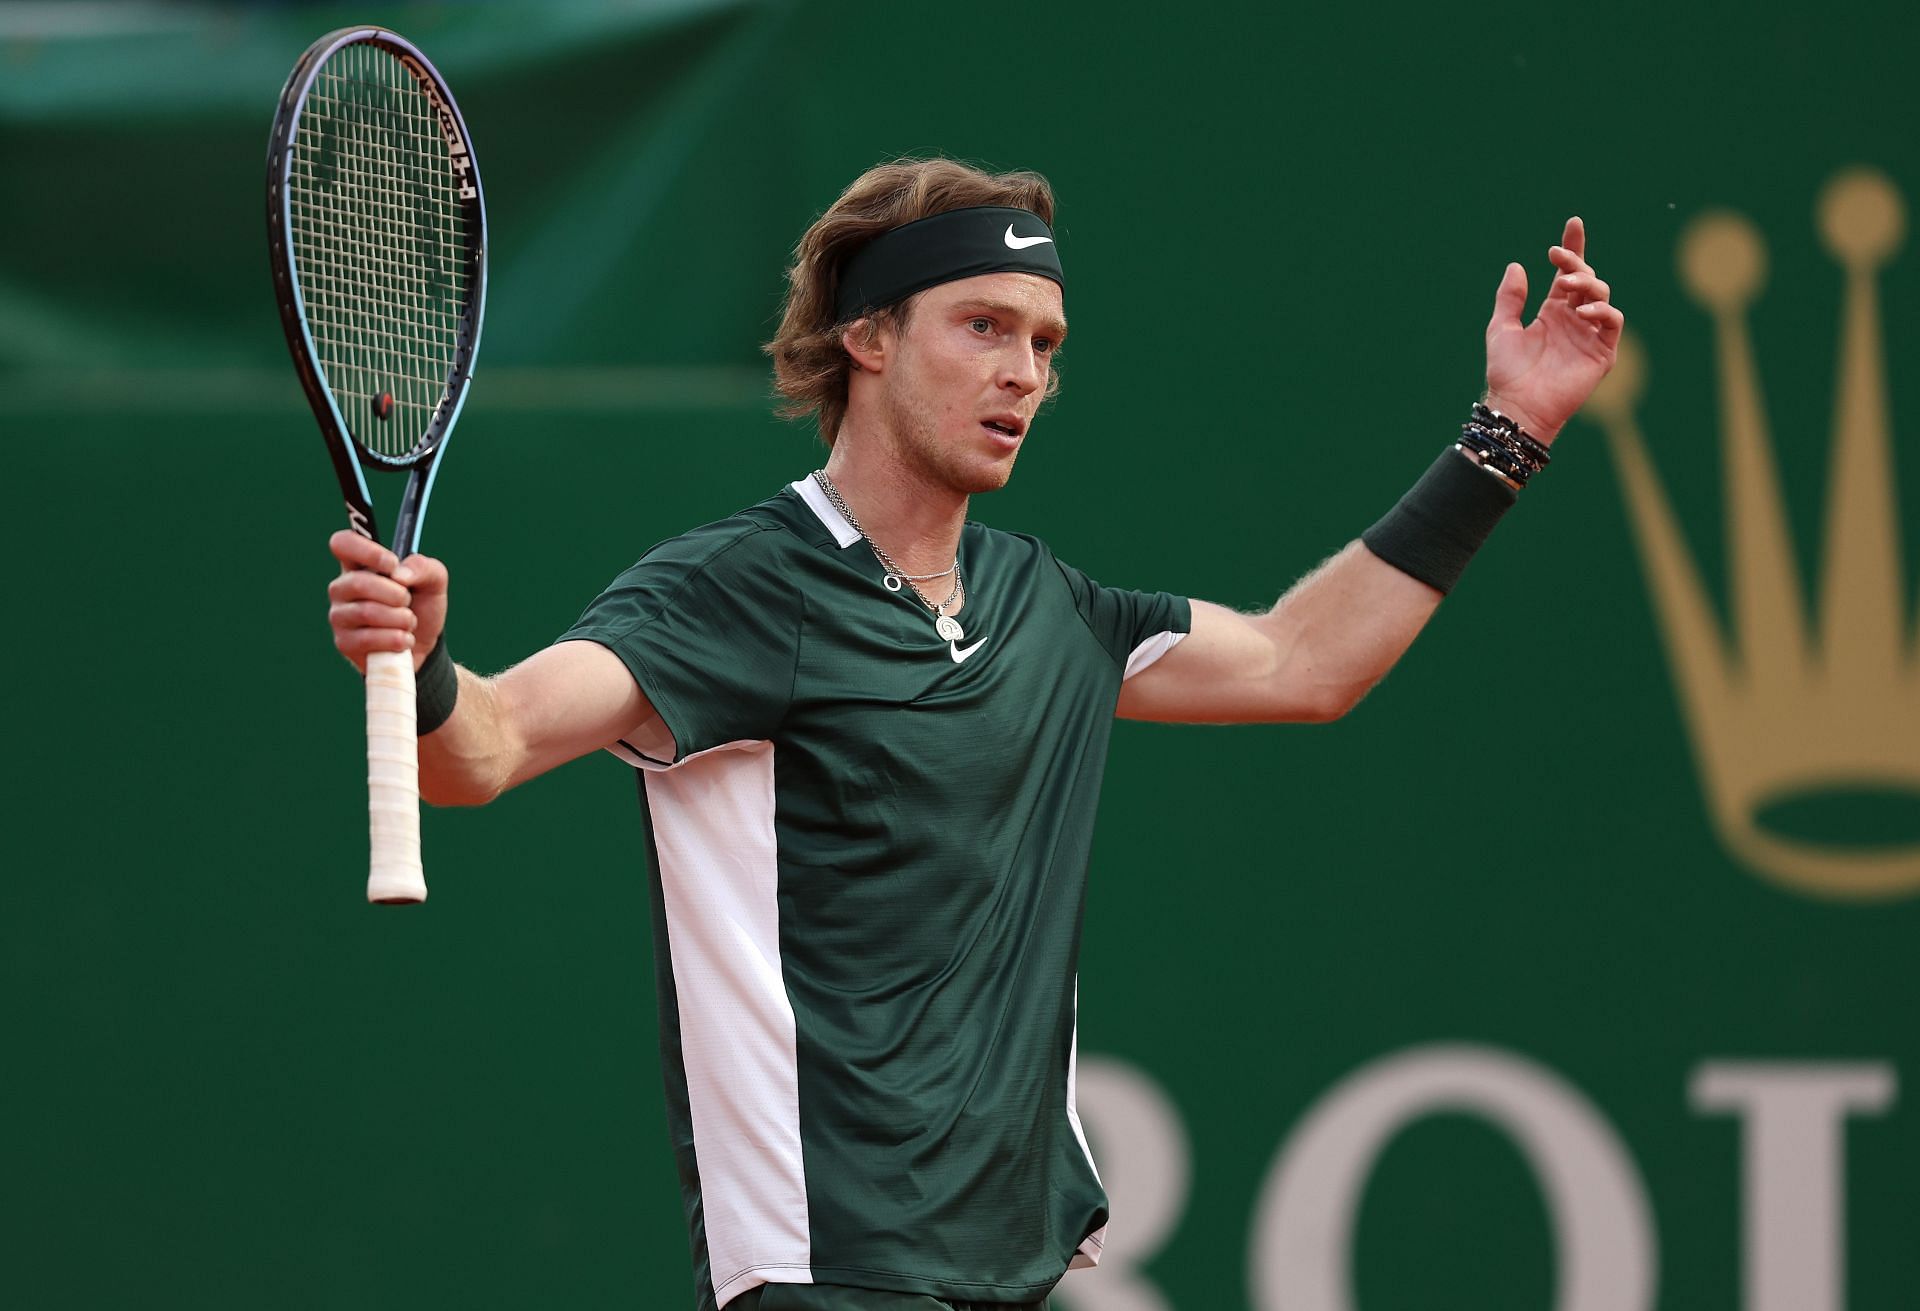 Andrey Rublev recently talked about his feat of scoring wins over each member of the Big 3